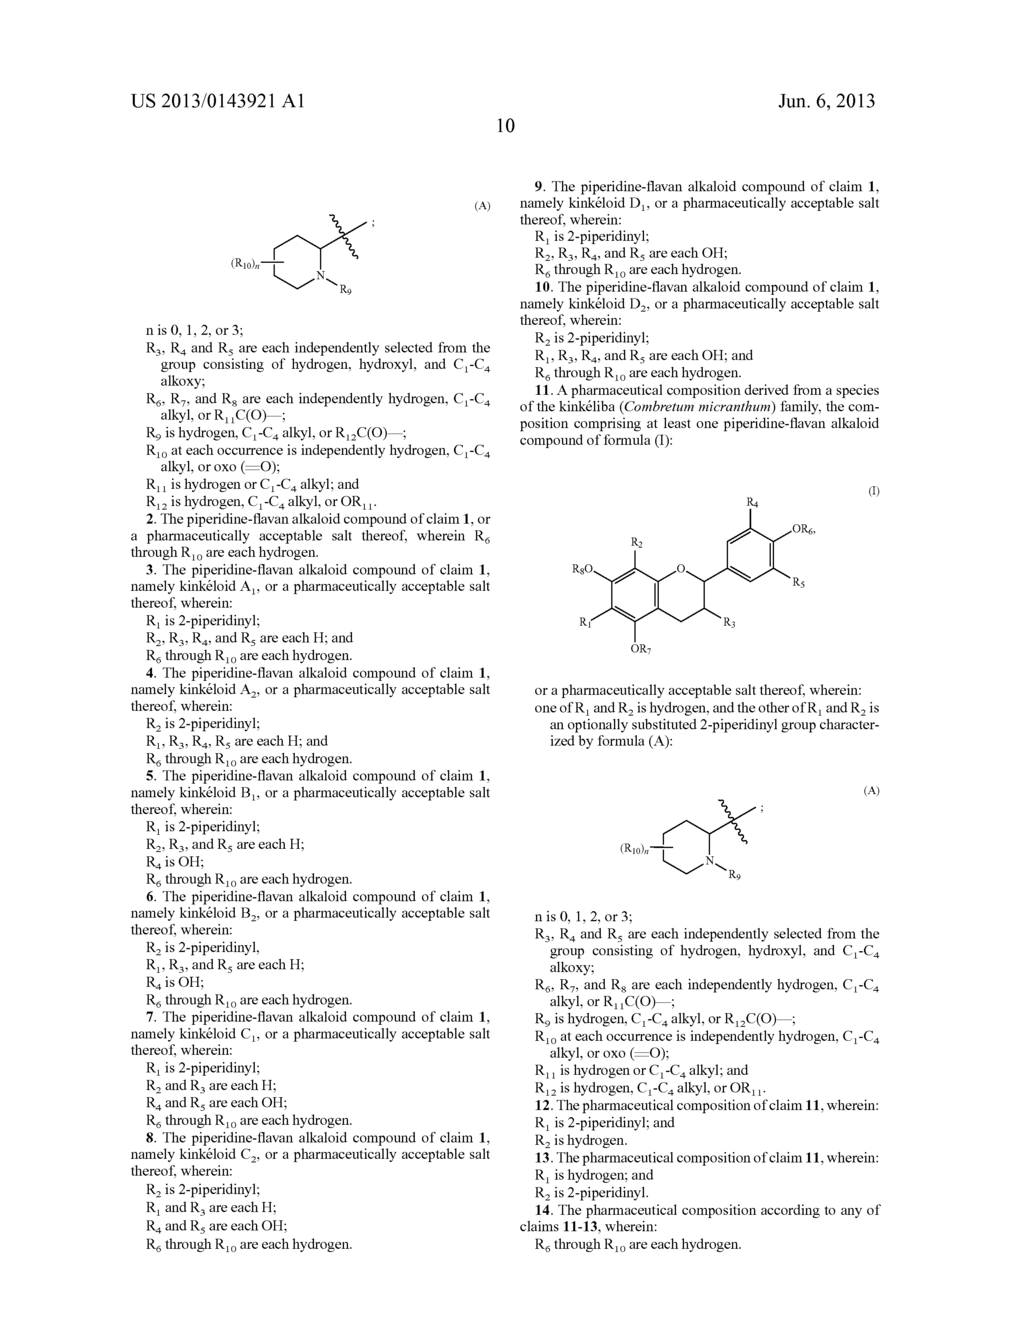 NOVEL PEPERIDINE-FLAVAN ALKALOID COMPOUNDS DERIVED FROM AFRICAN HERB TEA     KINKELIBA AS ANTI-DIABETIC AGENTS - diagram, schematic, and image 17